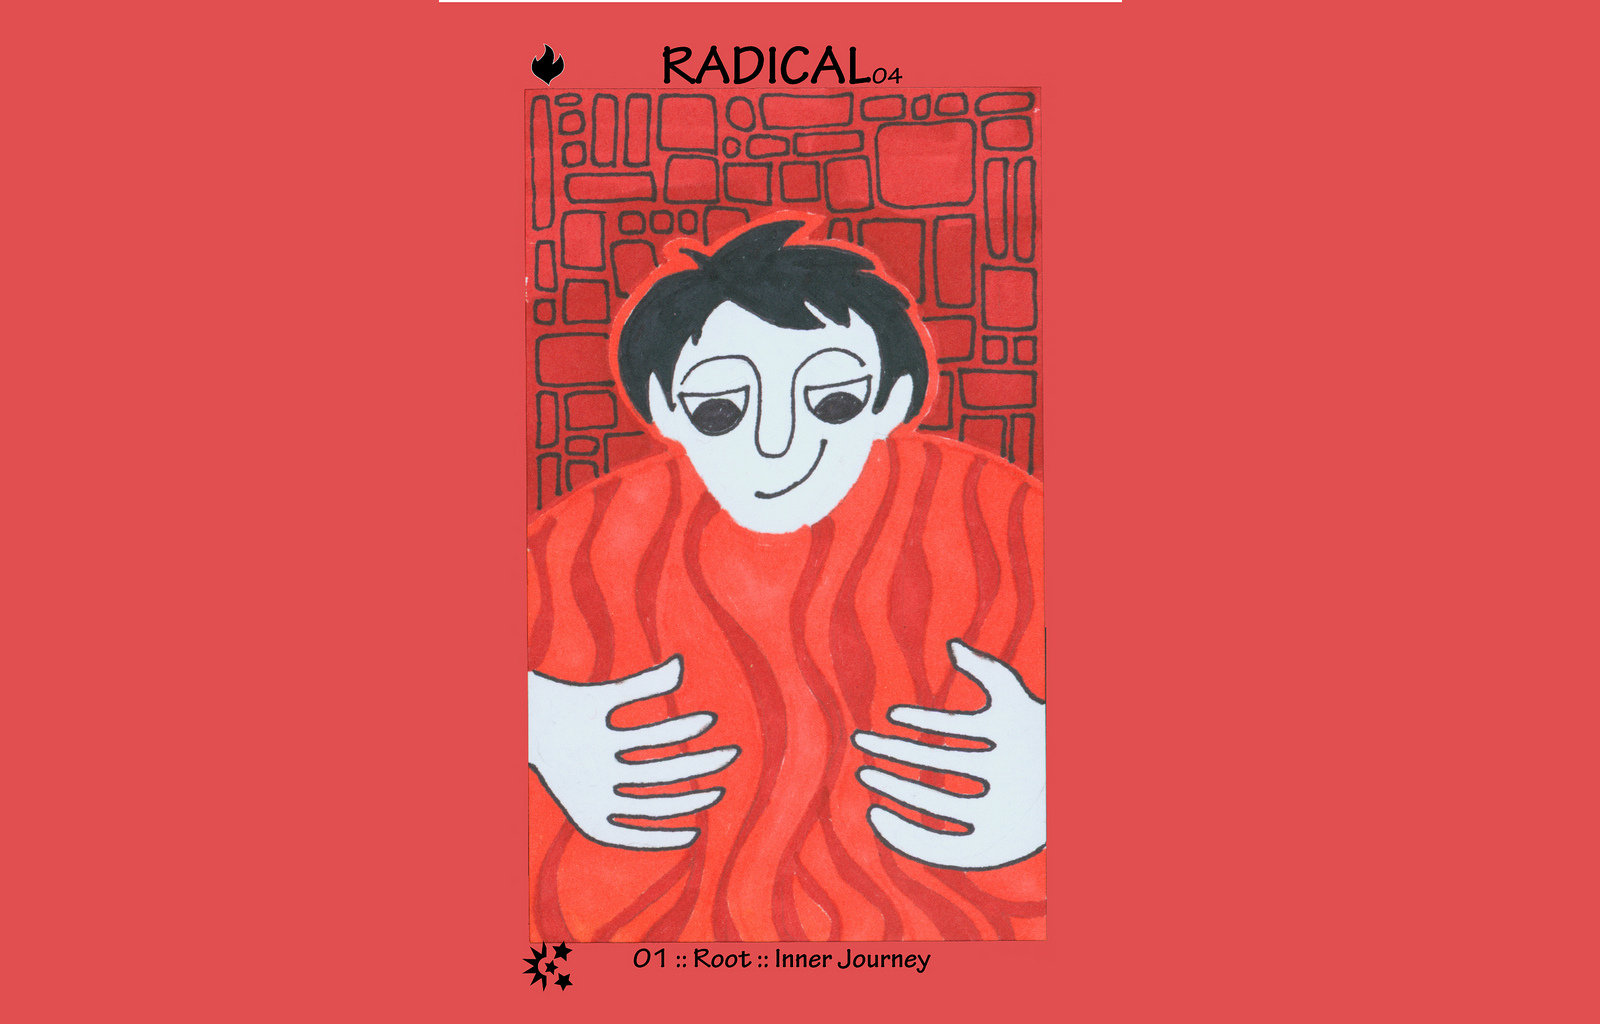 Book of the Day: Elinor Ostrom’s Rules for Radicals,Cooperative Alternatives beyond Markets and States